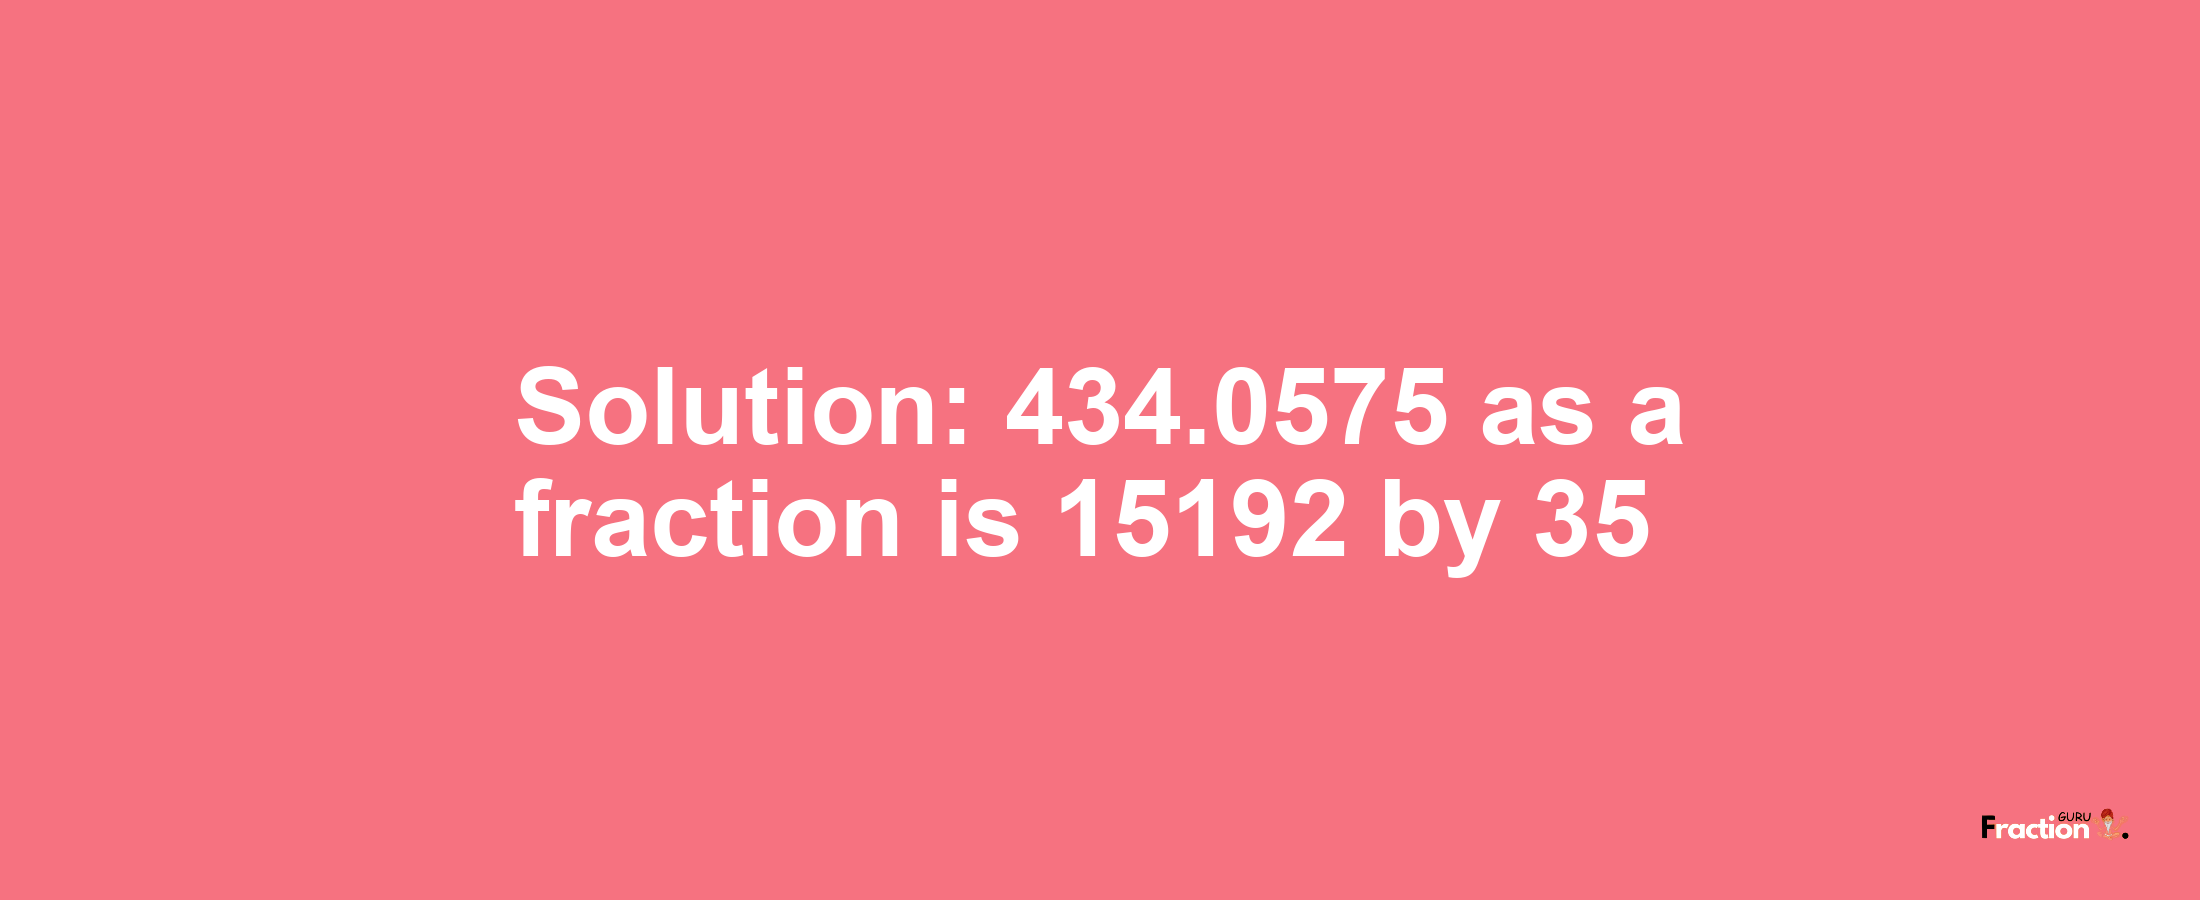 Solution:434.0575 as a fraction is 15192/35